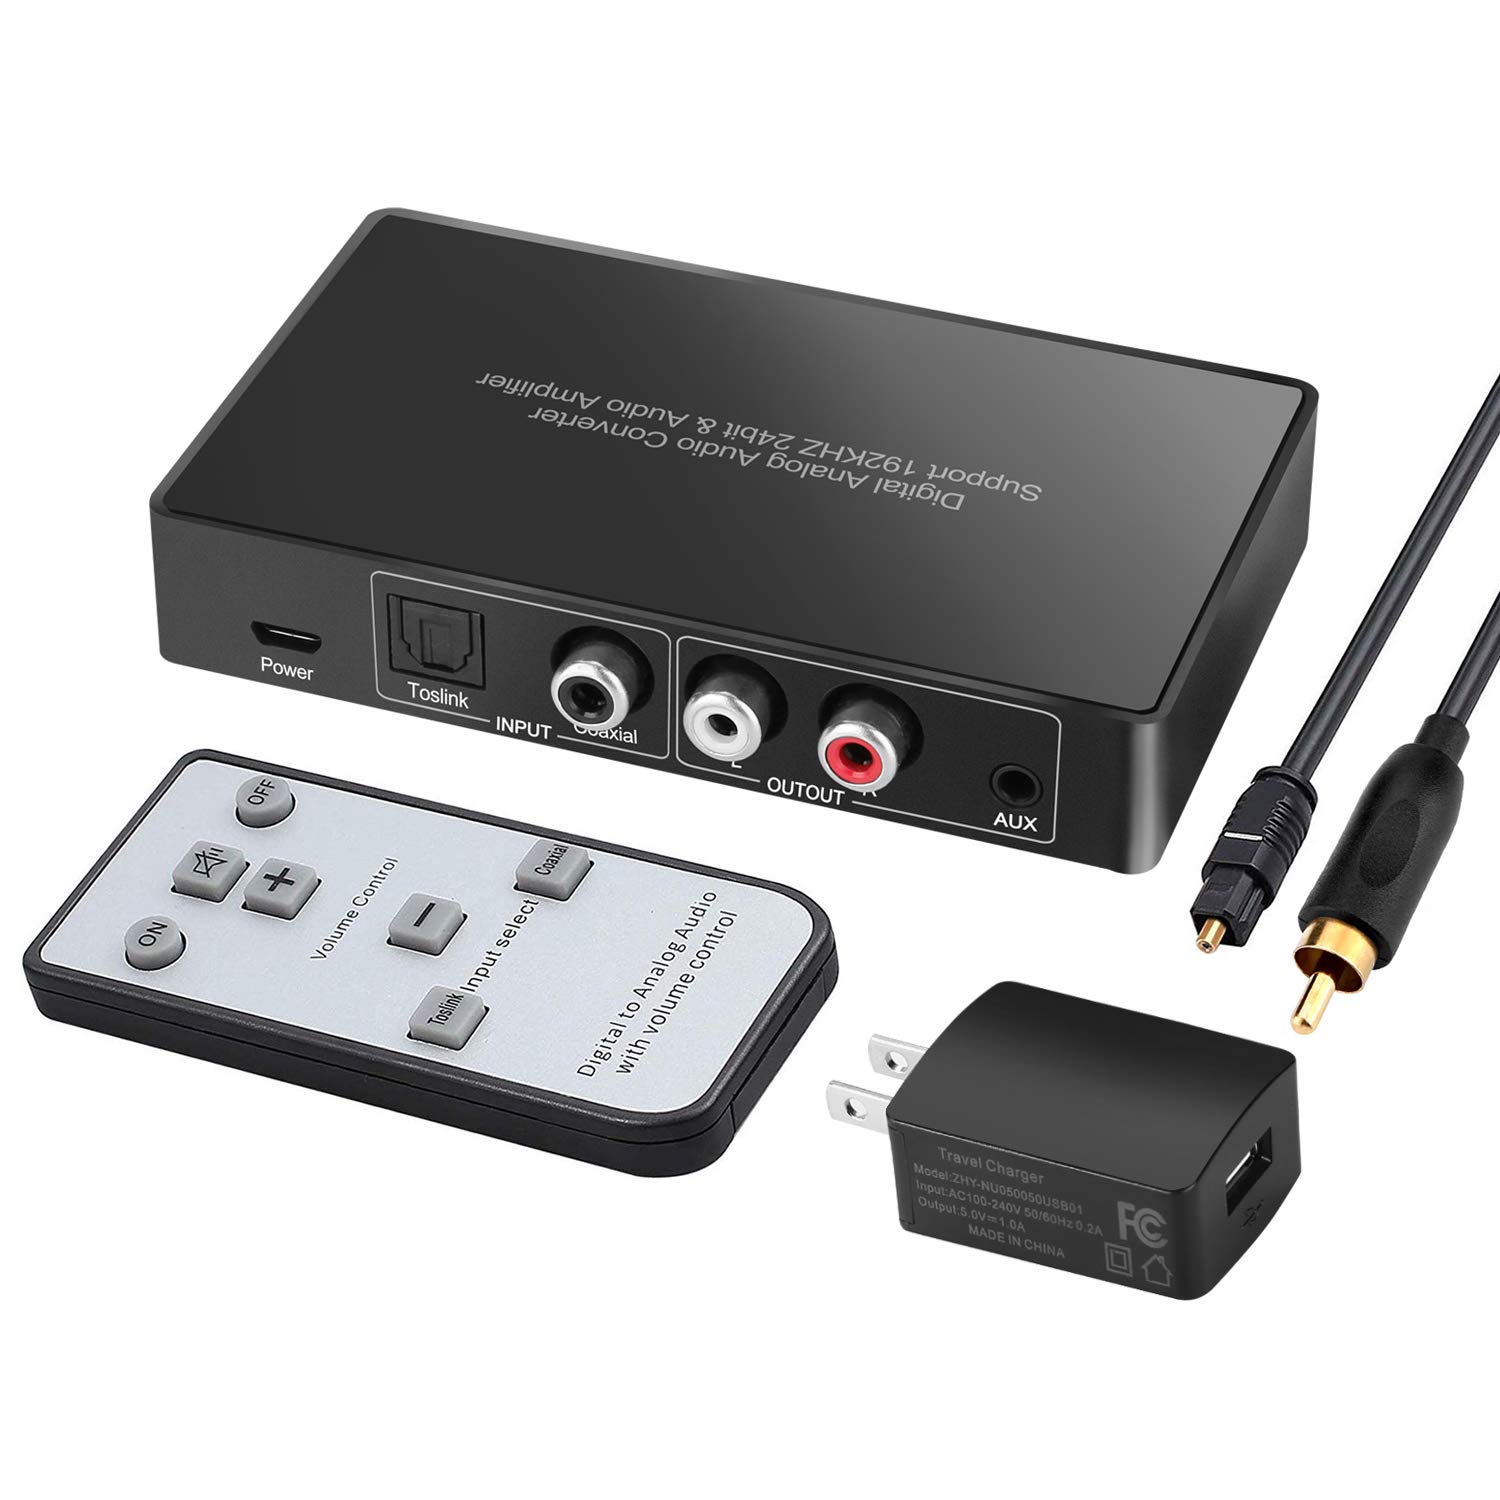 Digital to Analog Audio Converter with Remote, 192KHz/24bit Digital Coaxial Toslink to Analog L/R RCA 3.5mm Audio with Both Toslink Cable and Coaxial Cable